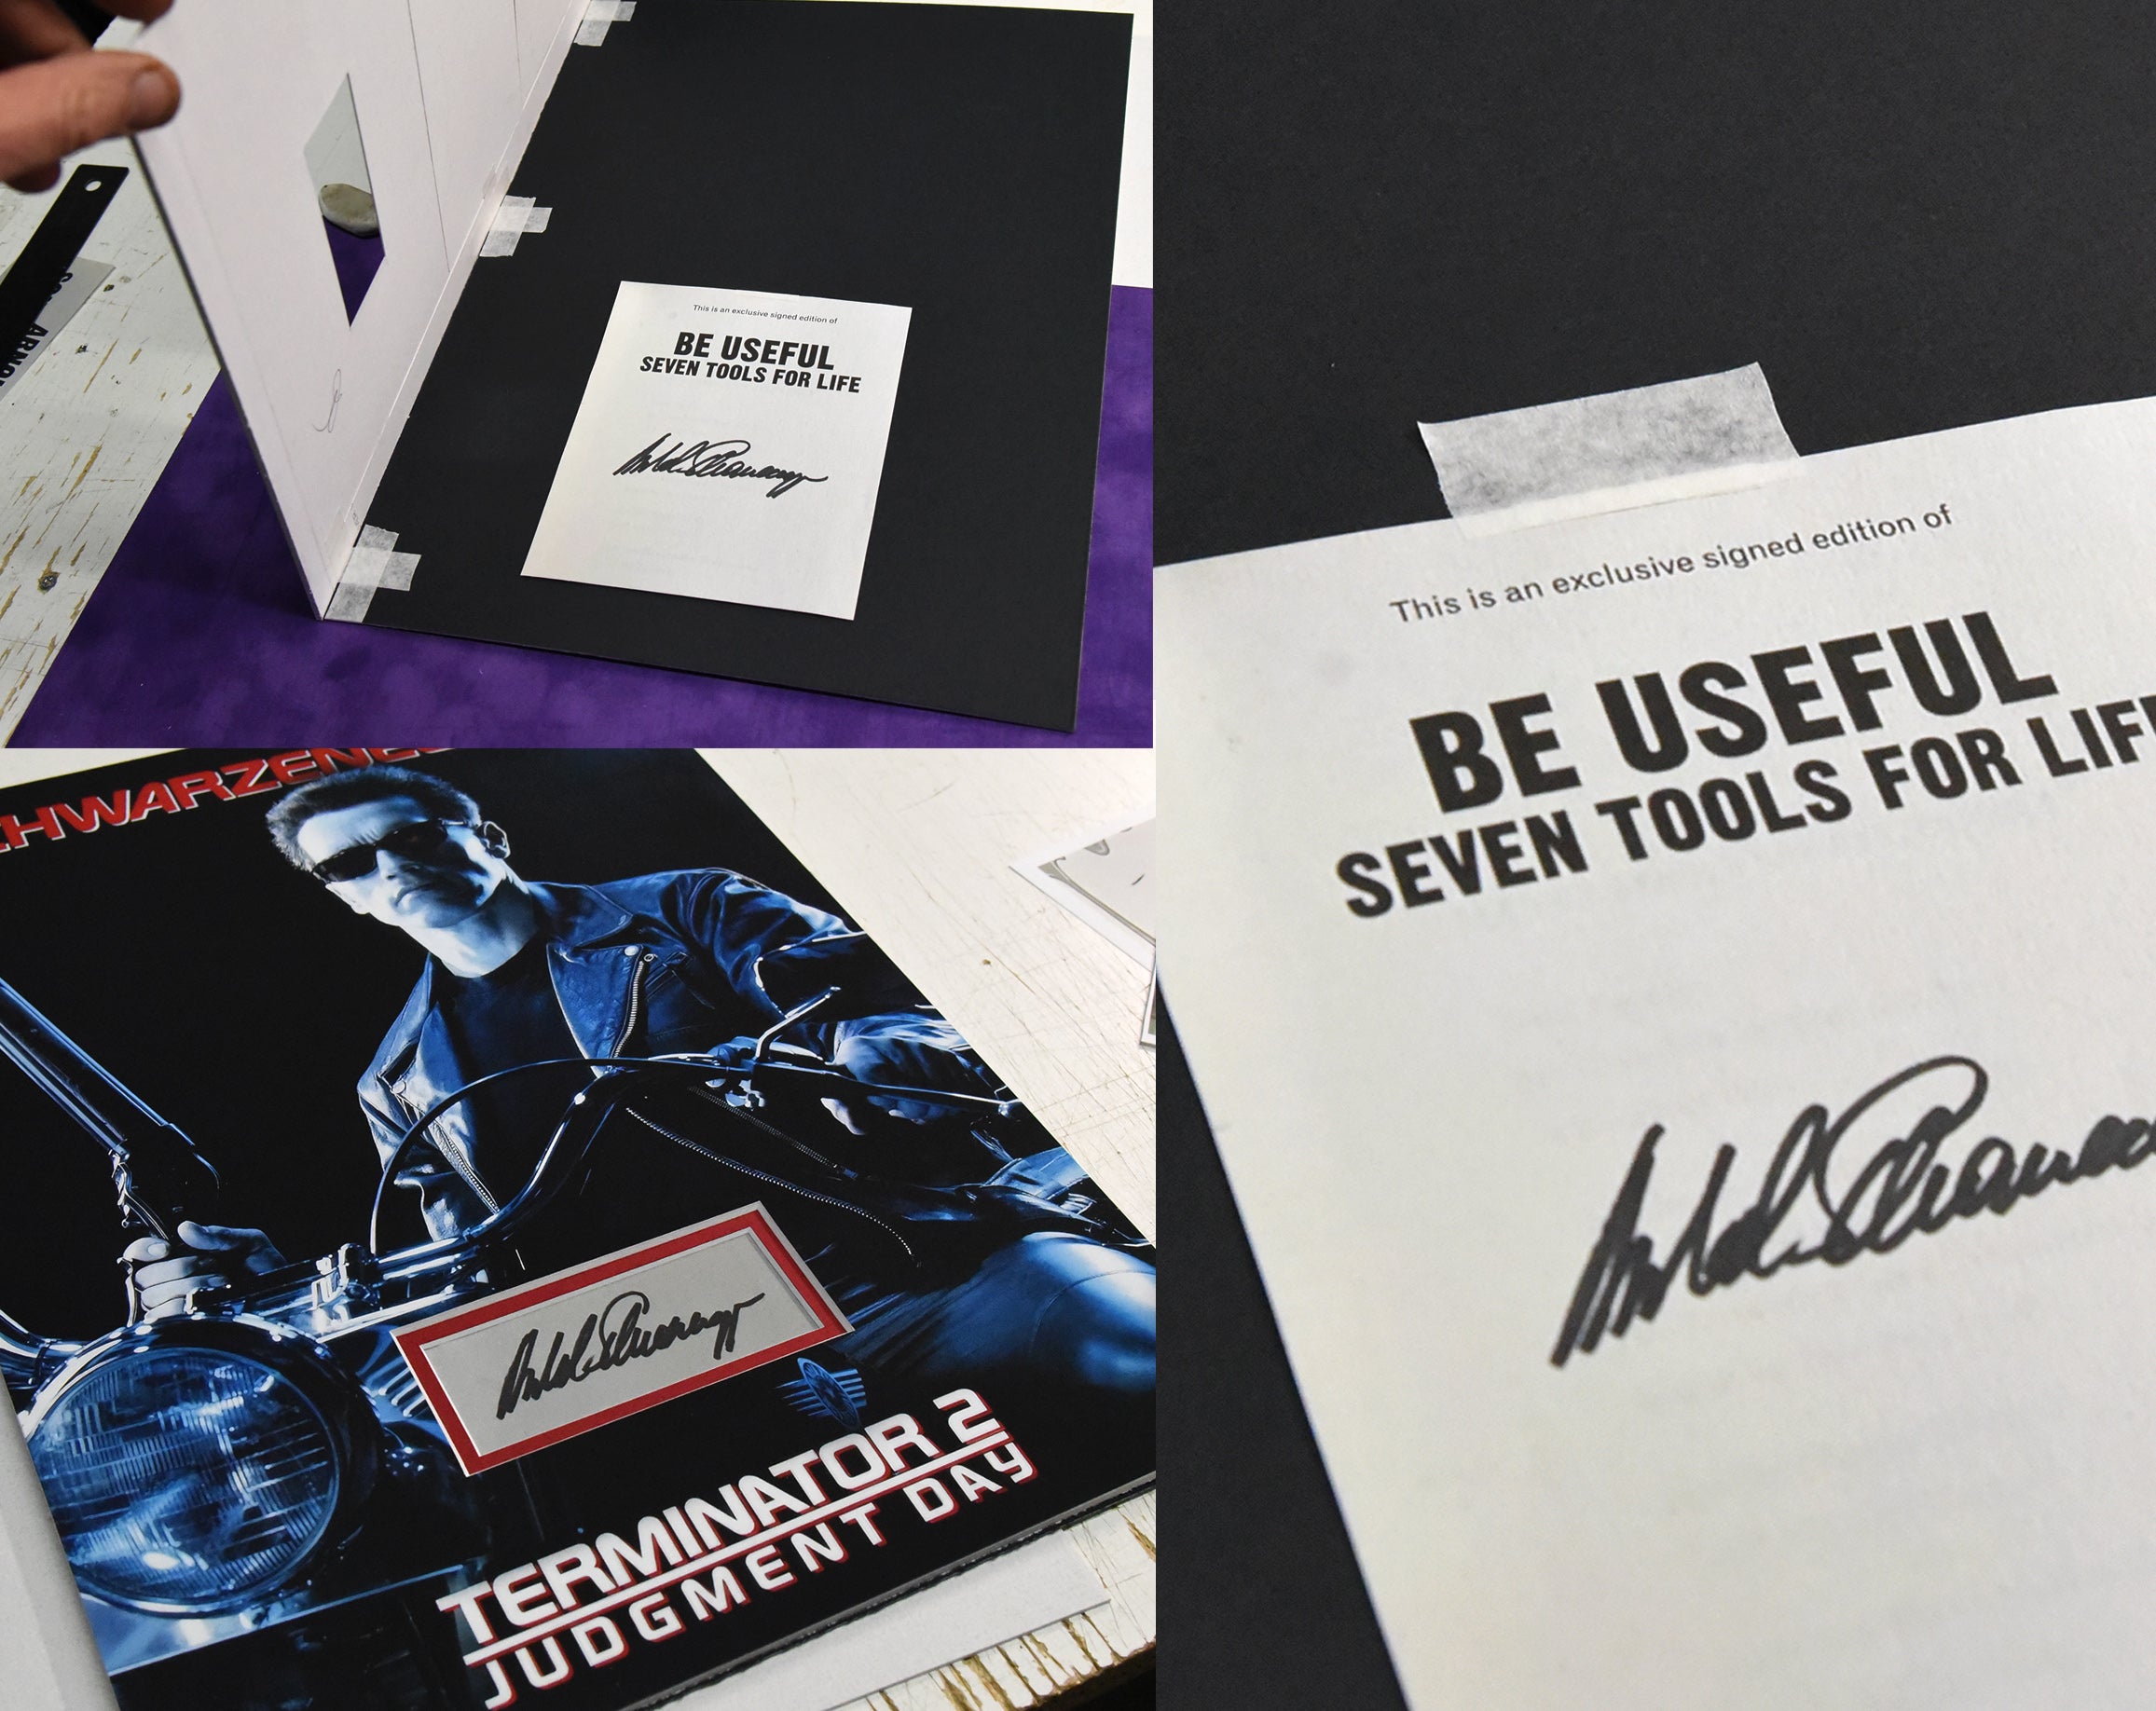 AUTOGRAPHED SIGNED Arnold Schwarzenegger Be Useful Seven Tools Life Book IN  HAND